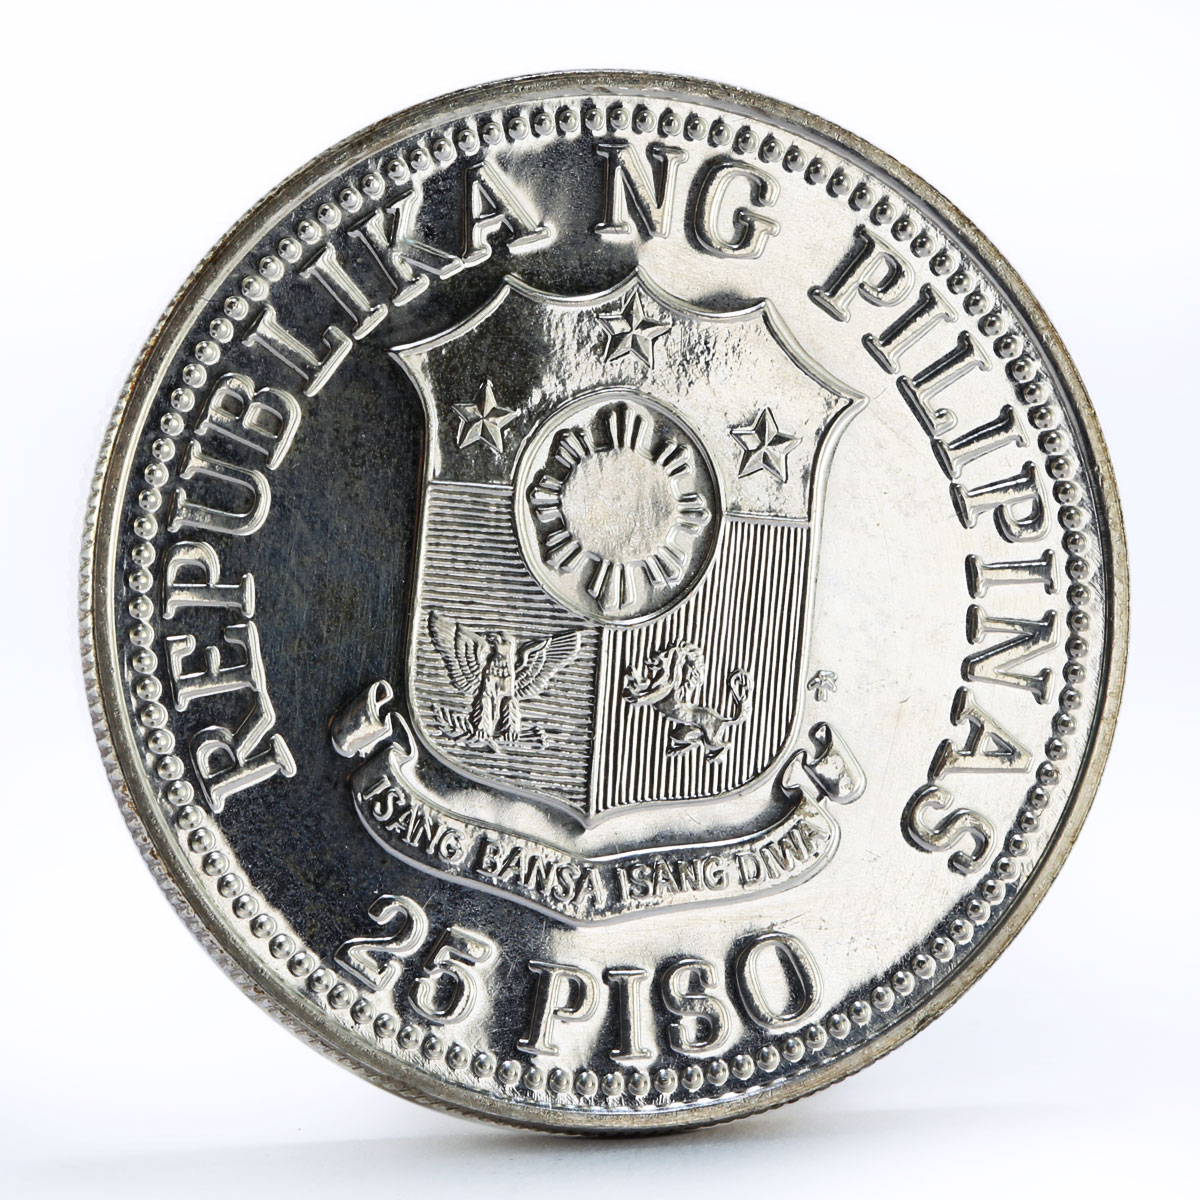 Philippines 25 pisos World Food Day proof silver coin 1981